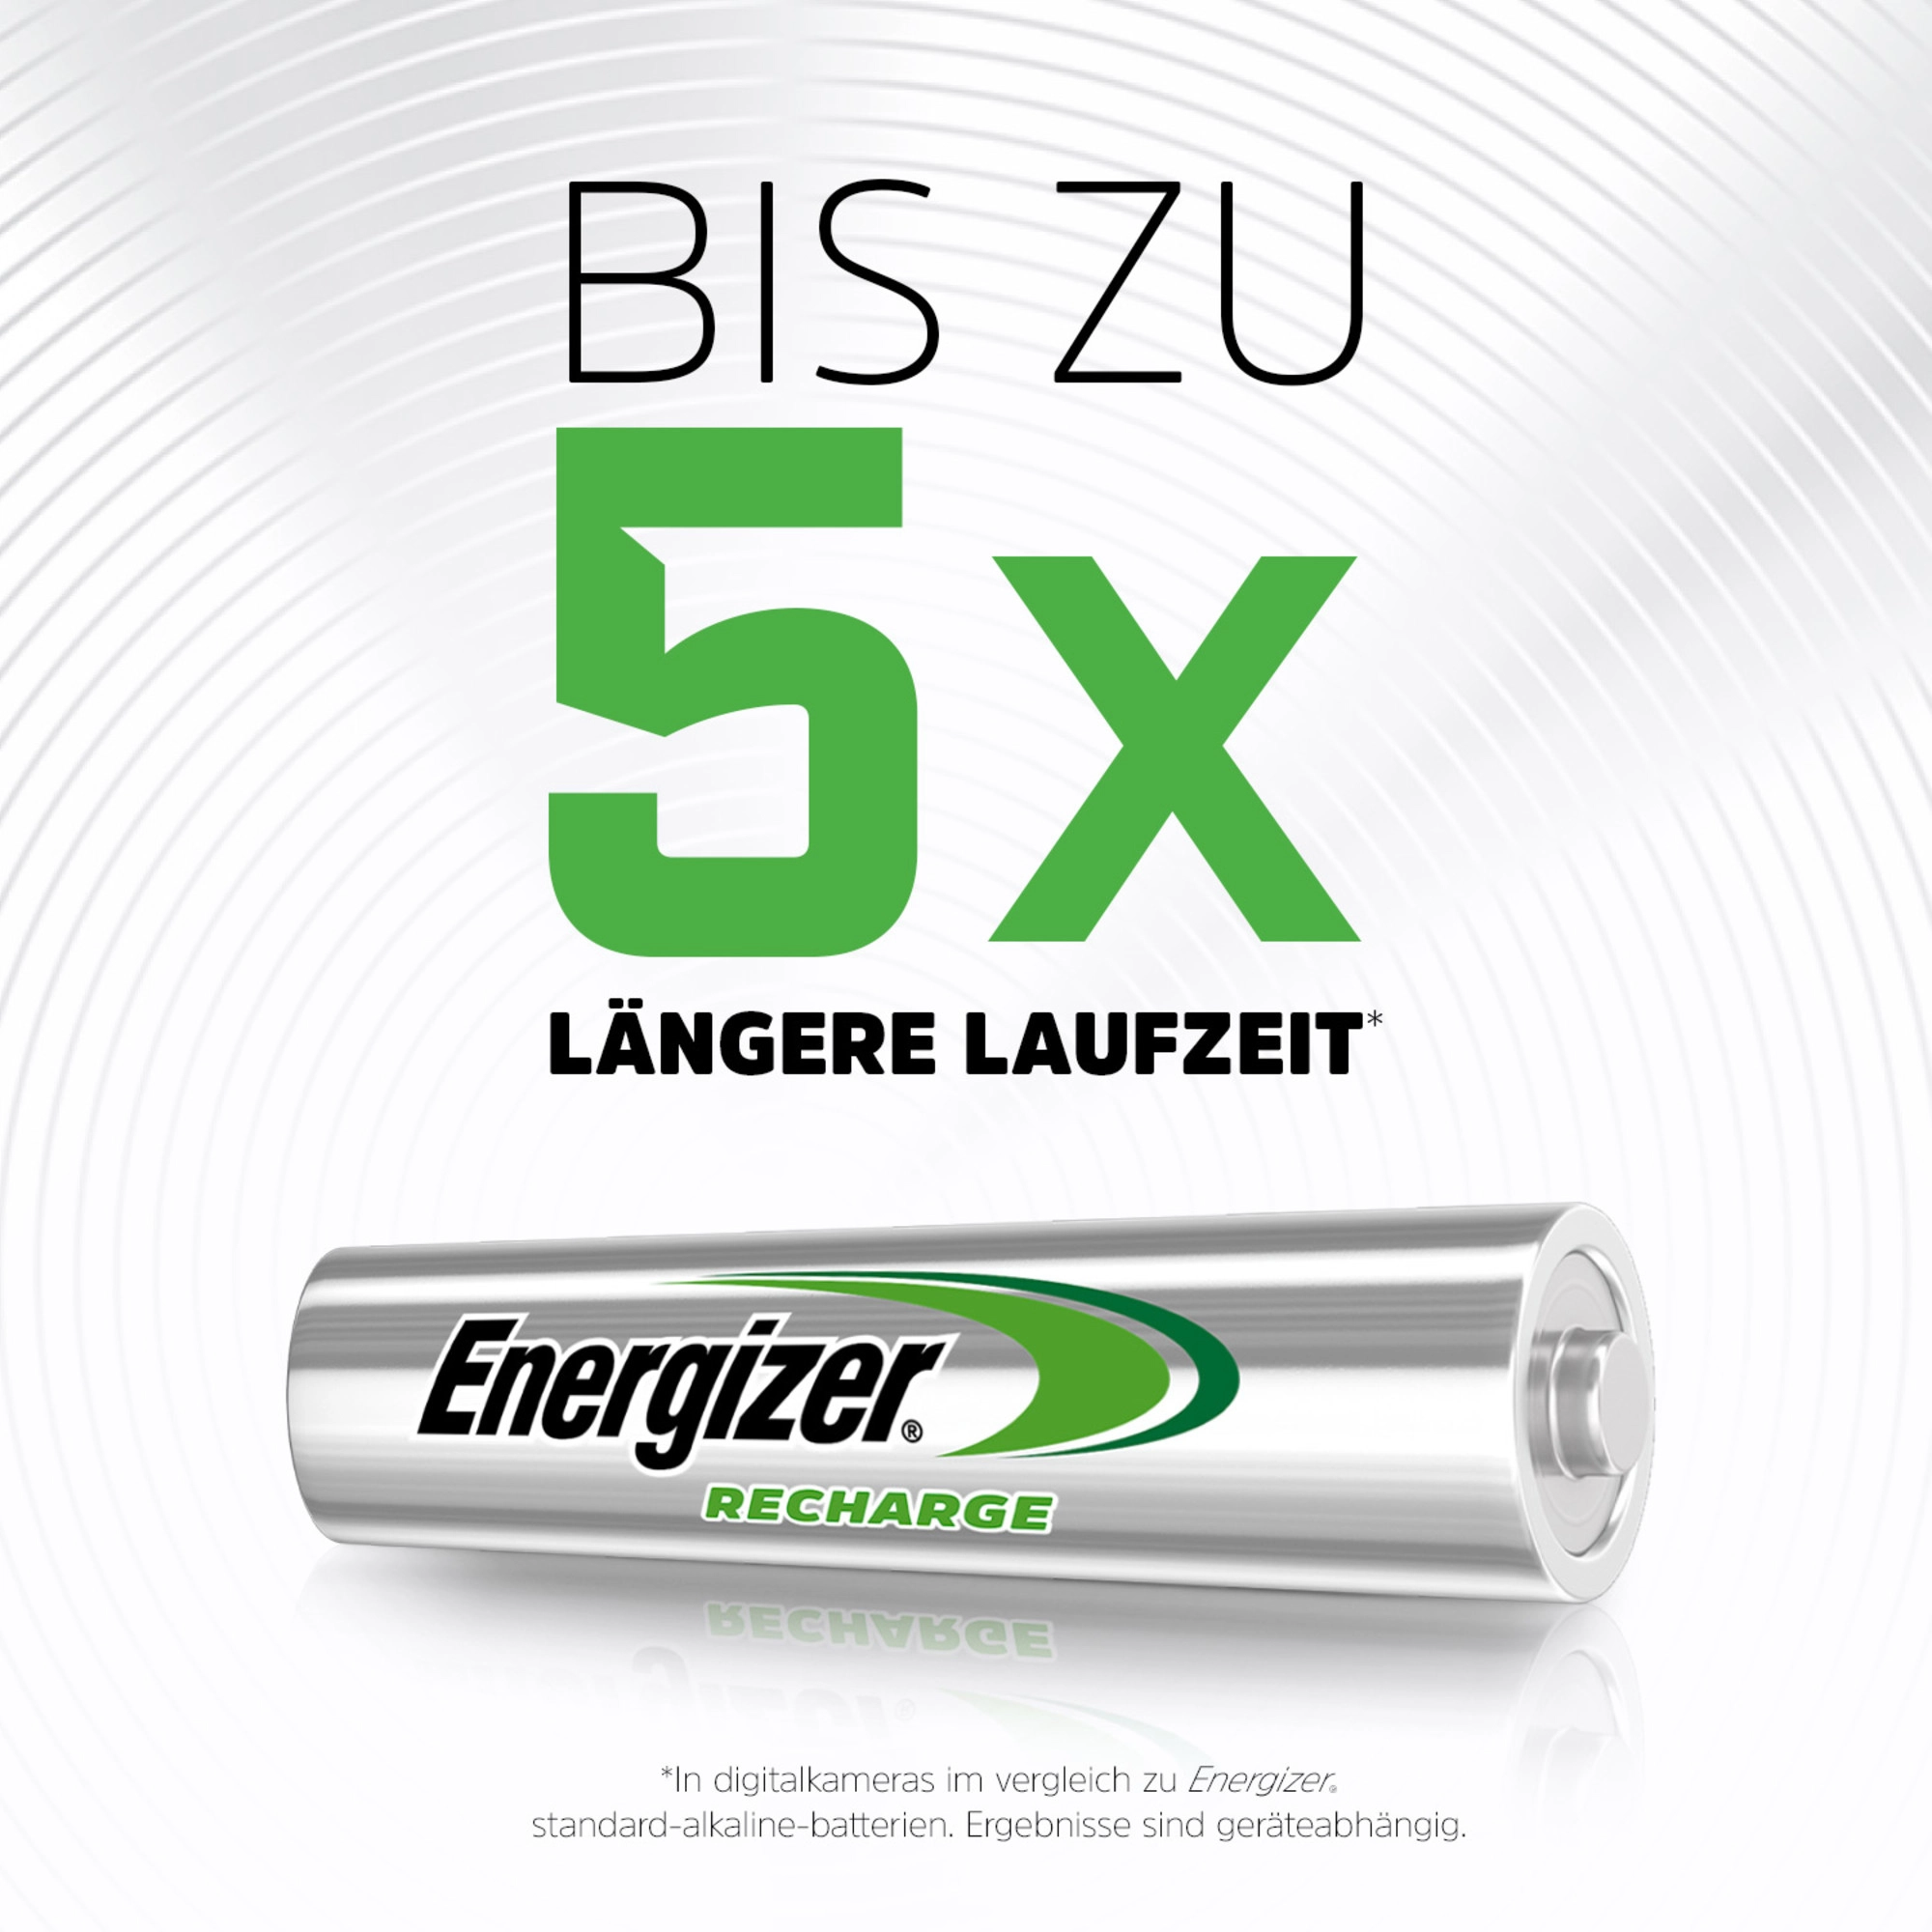 Piles Rechargeables AAA HR03 700mAh x2 Energizer - Mr.Bricolage